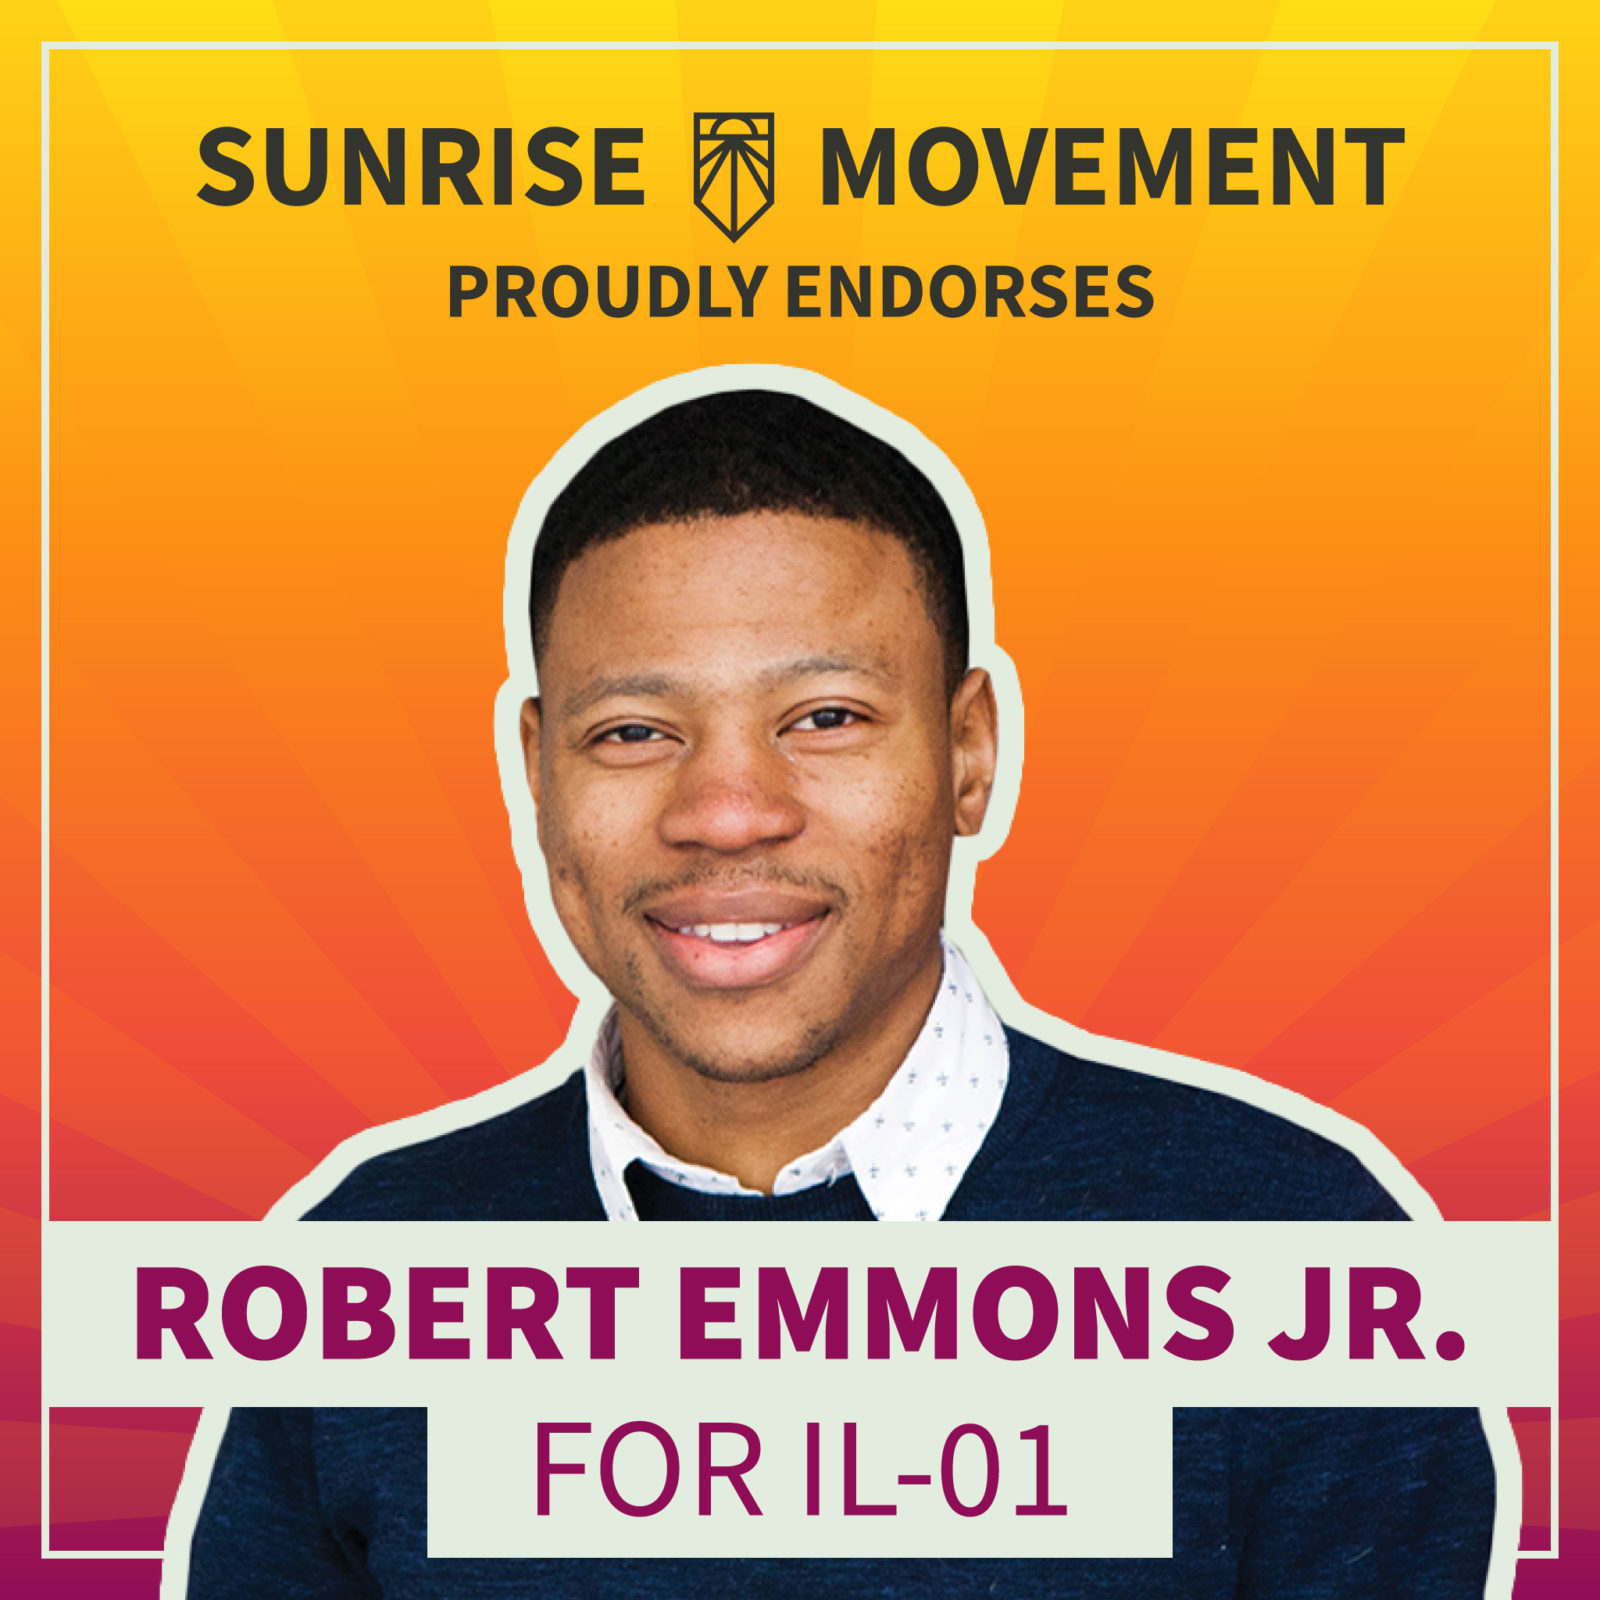 A photo of Robert Emmons Jr with text: Sunrise Movement proudly endorses Robert Emmons Jr for IL-01